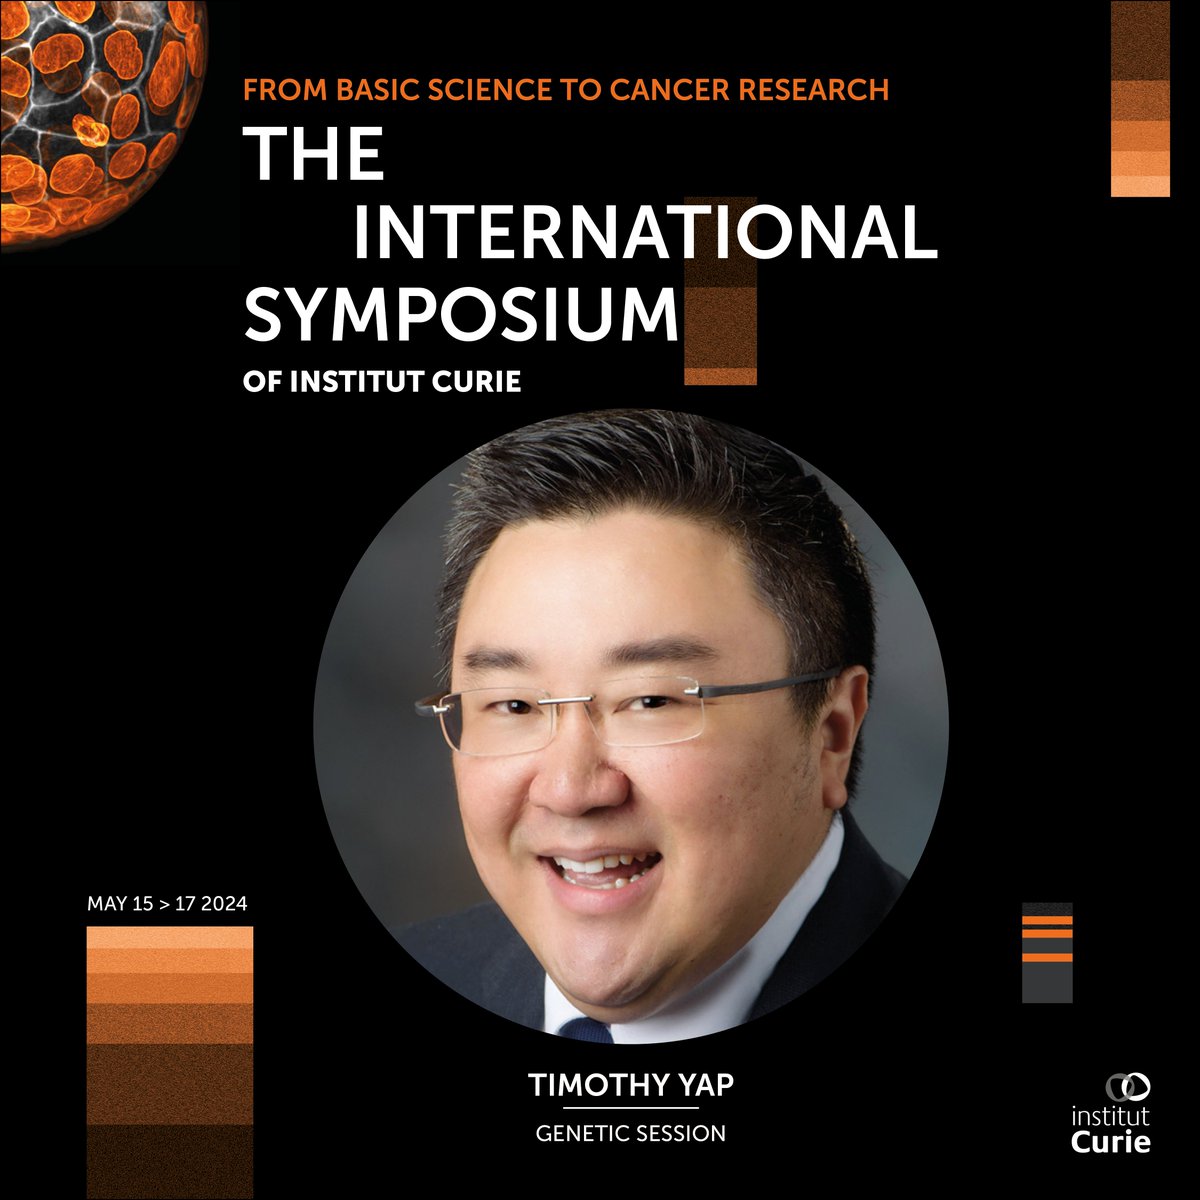 📅 Explore the forefront of #GeneticResearch at the #CurieSymposium in Paris and meet the expert Timothy Yap @MDAndersonNews, who will share insights on DNA damage response mechanisms and their clinical implications. Secure your spot now on ↘️ curiesymposium.fr/registration